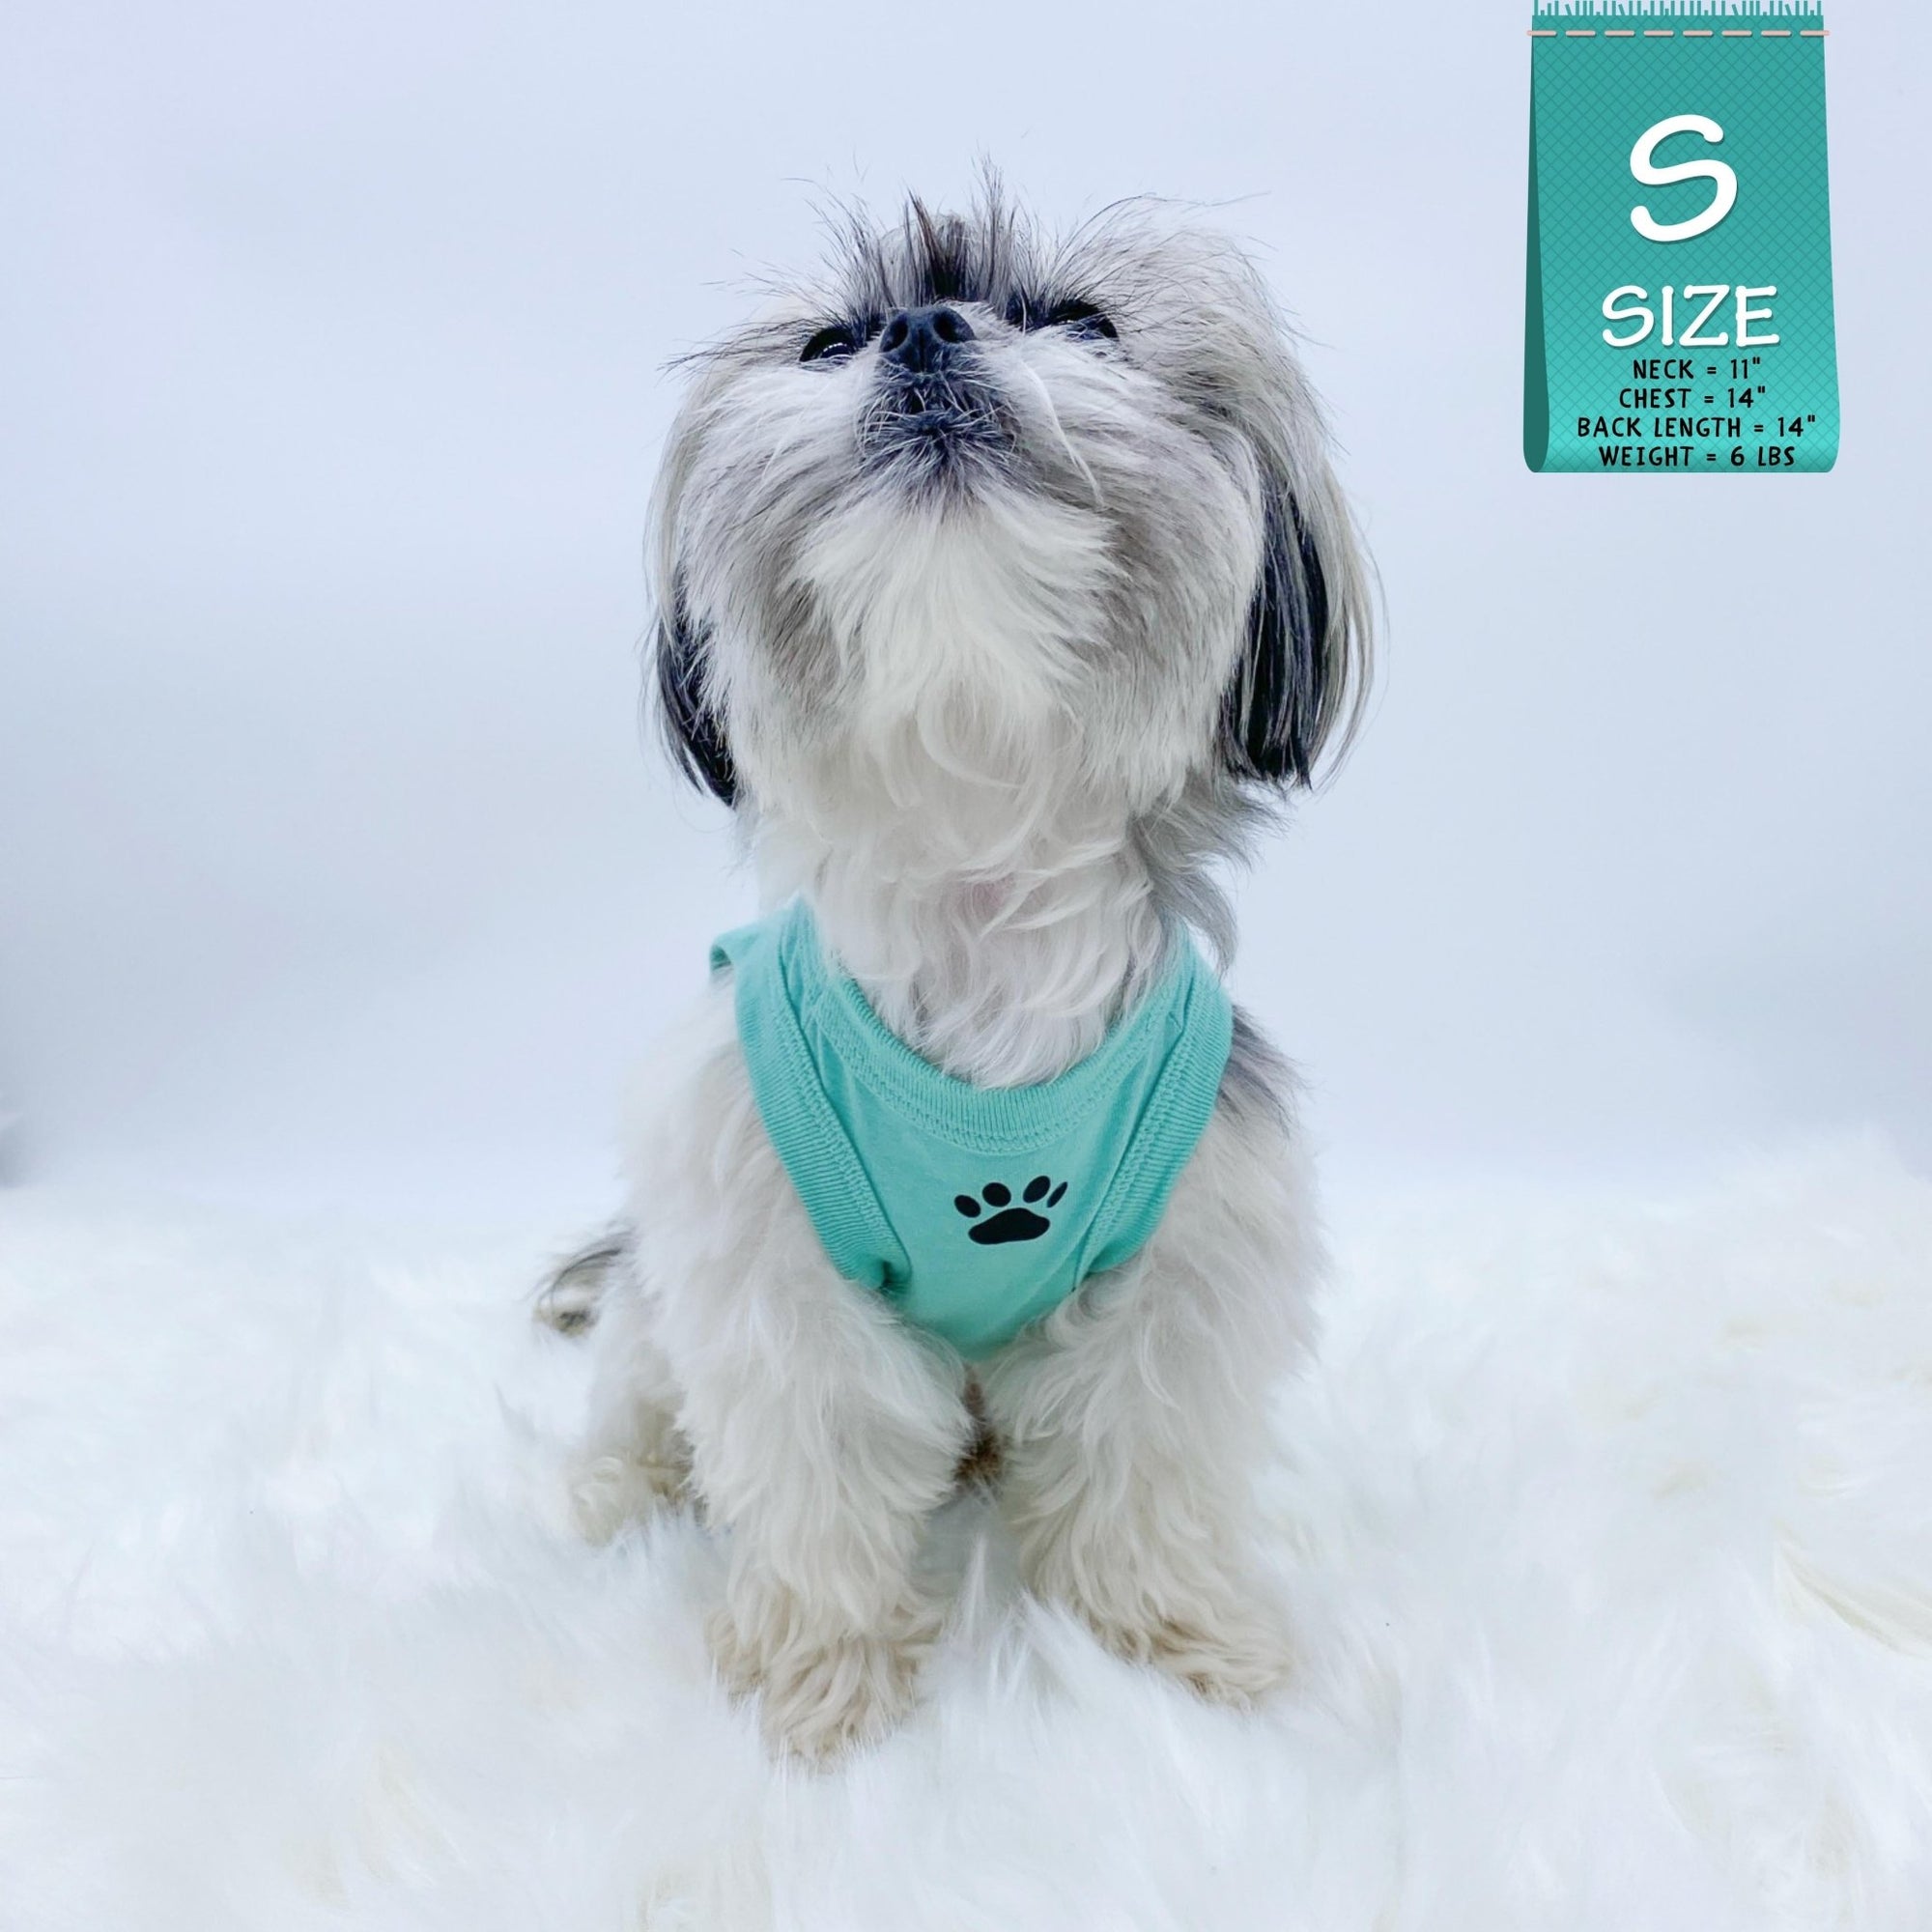 Dog T-Shirt - Shih Tzu mix looking up wearing &quot;Stay Pawsitive&quot; teal dog t-shirt - with a paw print emoji in black on chest - against solid white background - Wag Trendz